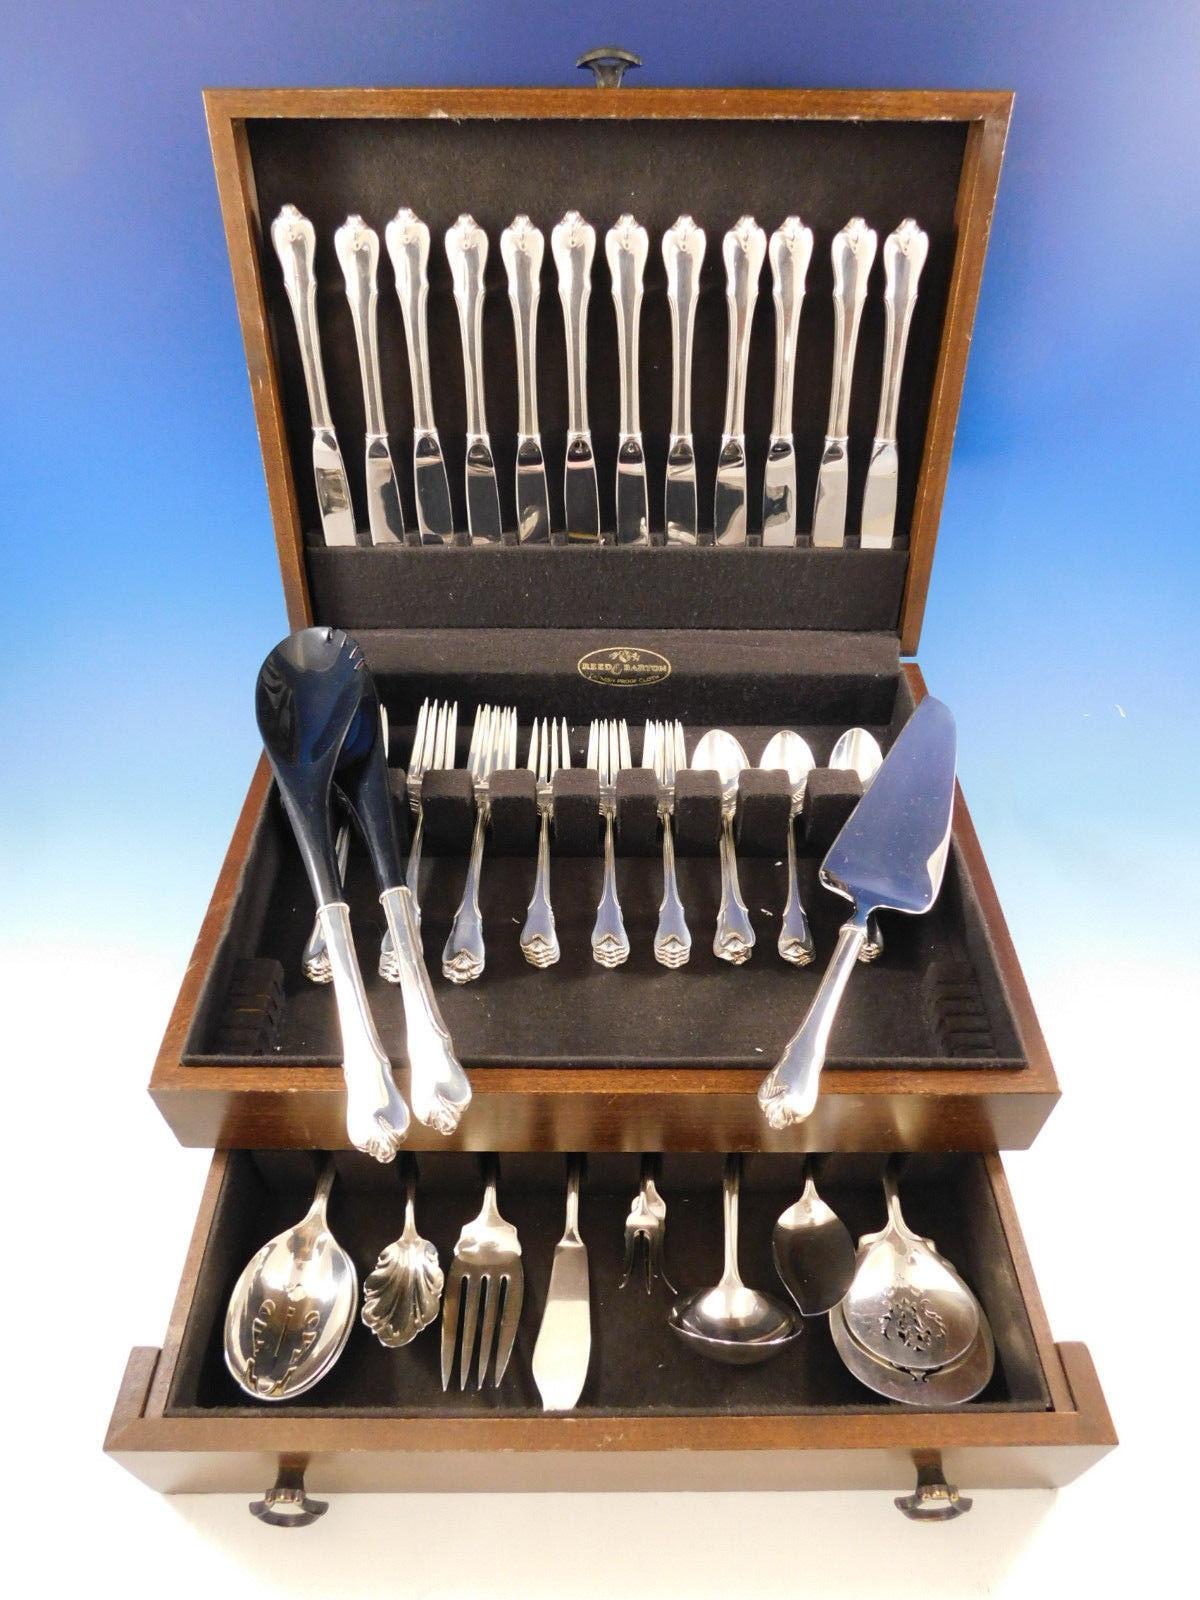 Grand Colonial by Wallace sterling silver flatware set, 62 pieces. This set includes:

12 knives, 8 7/8